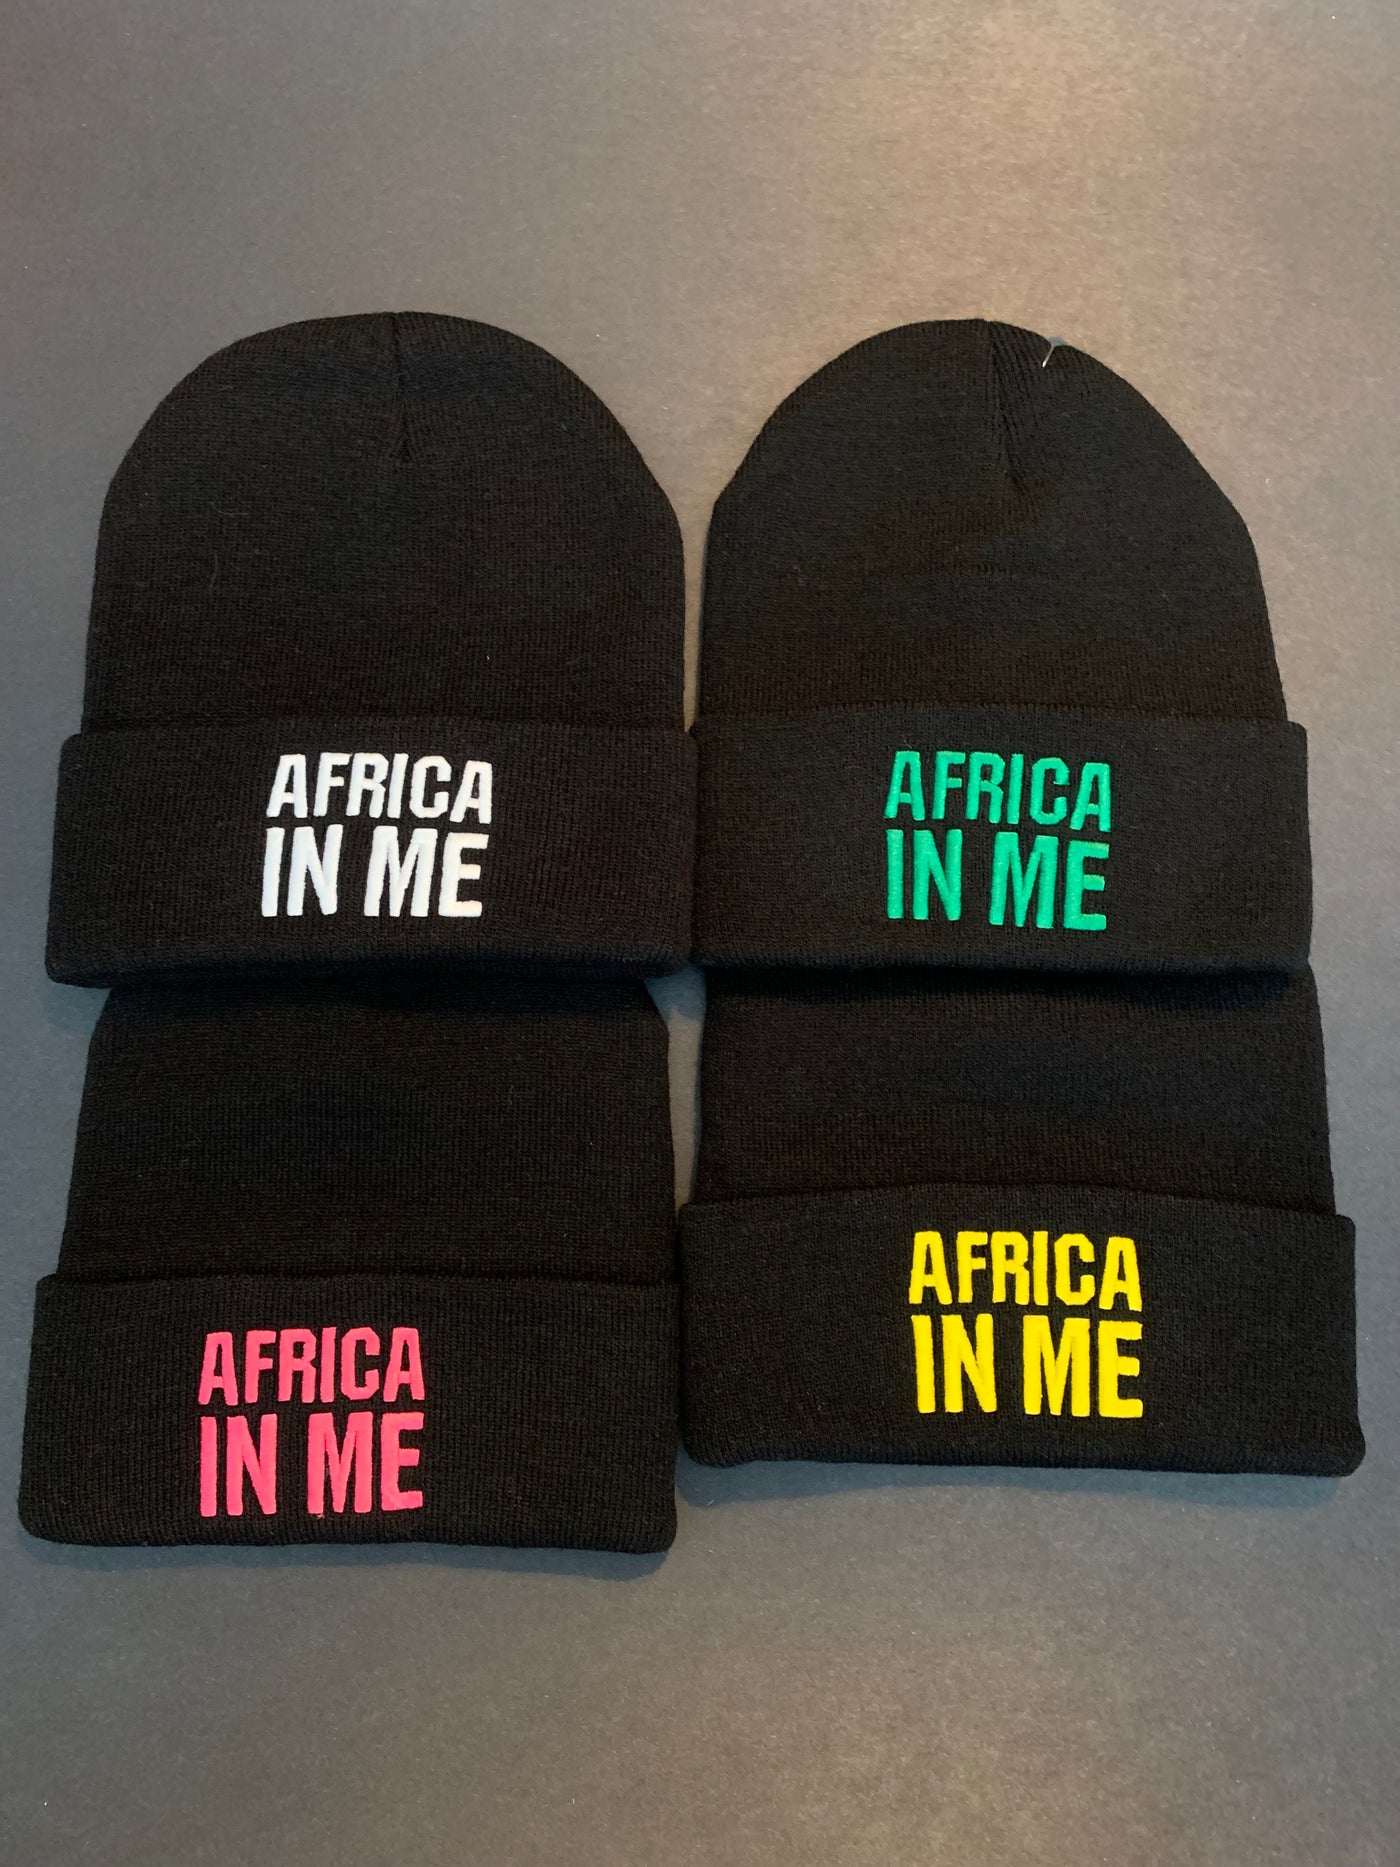 Africa In Me Insulated Knit Toque